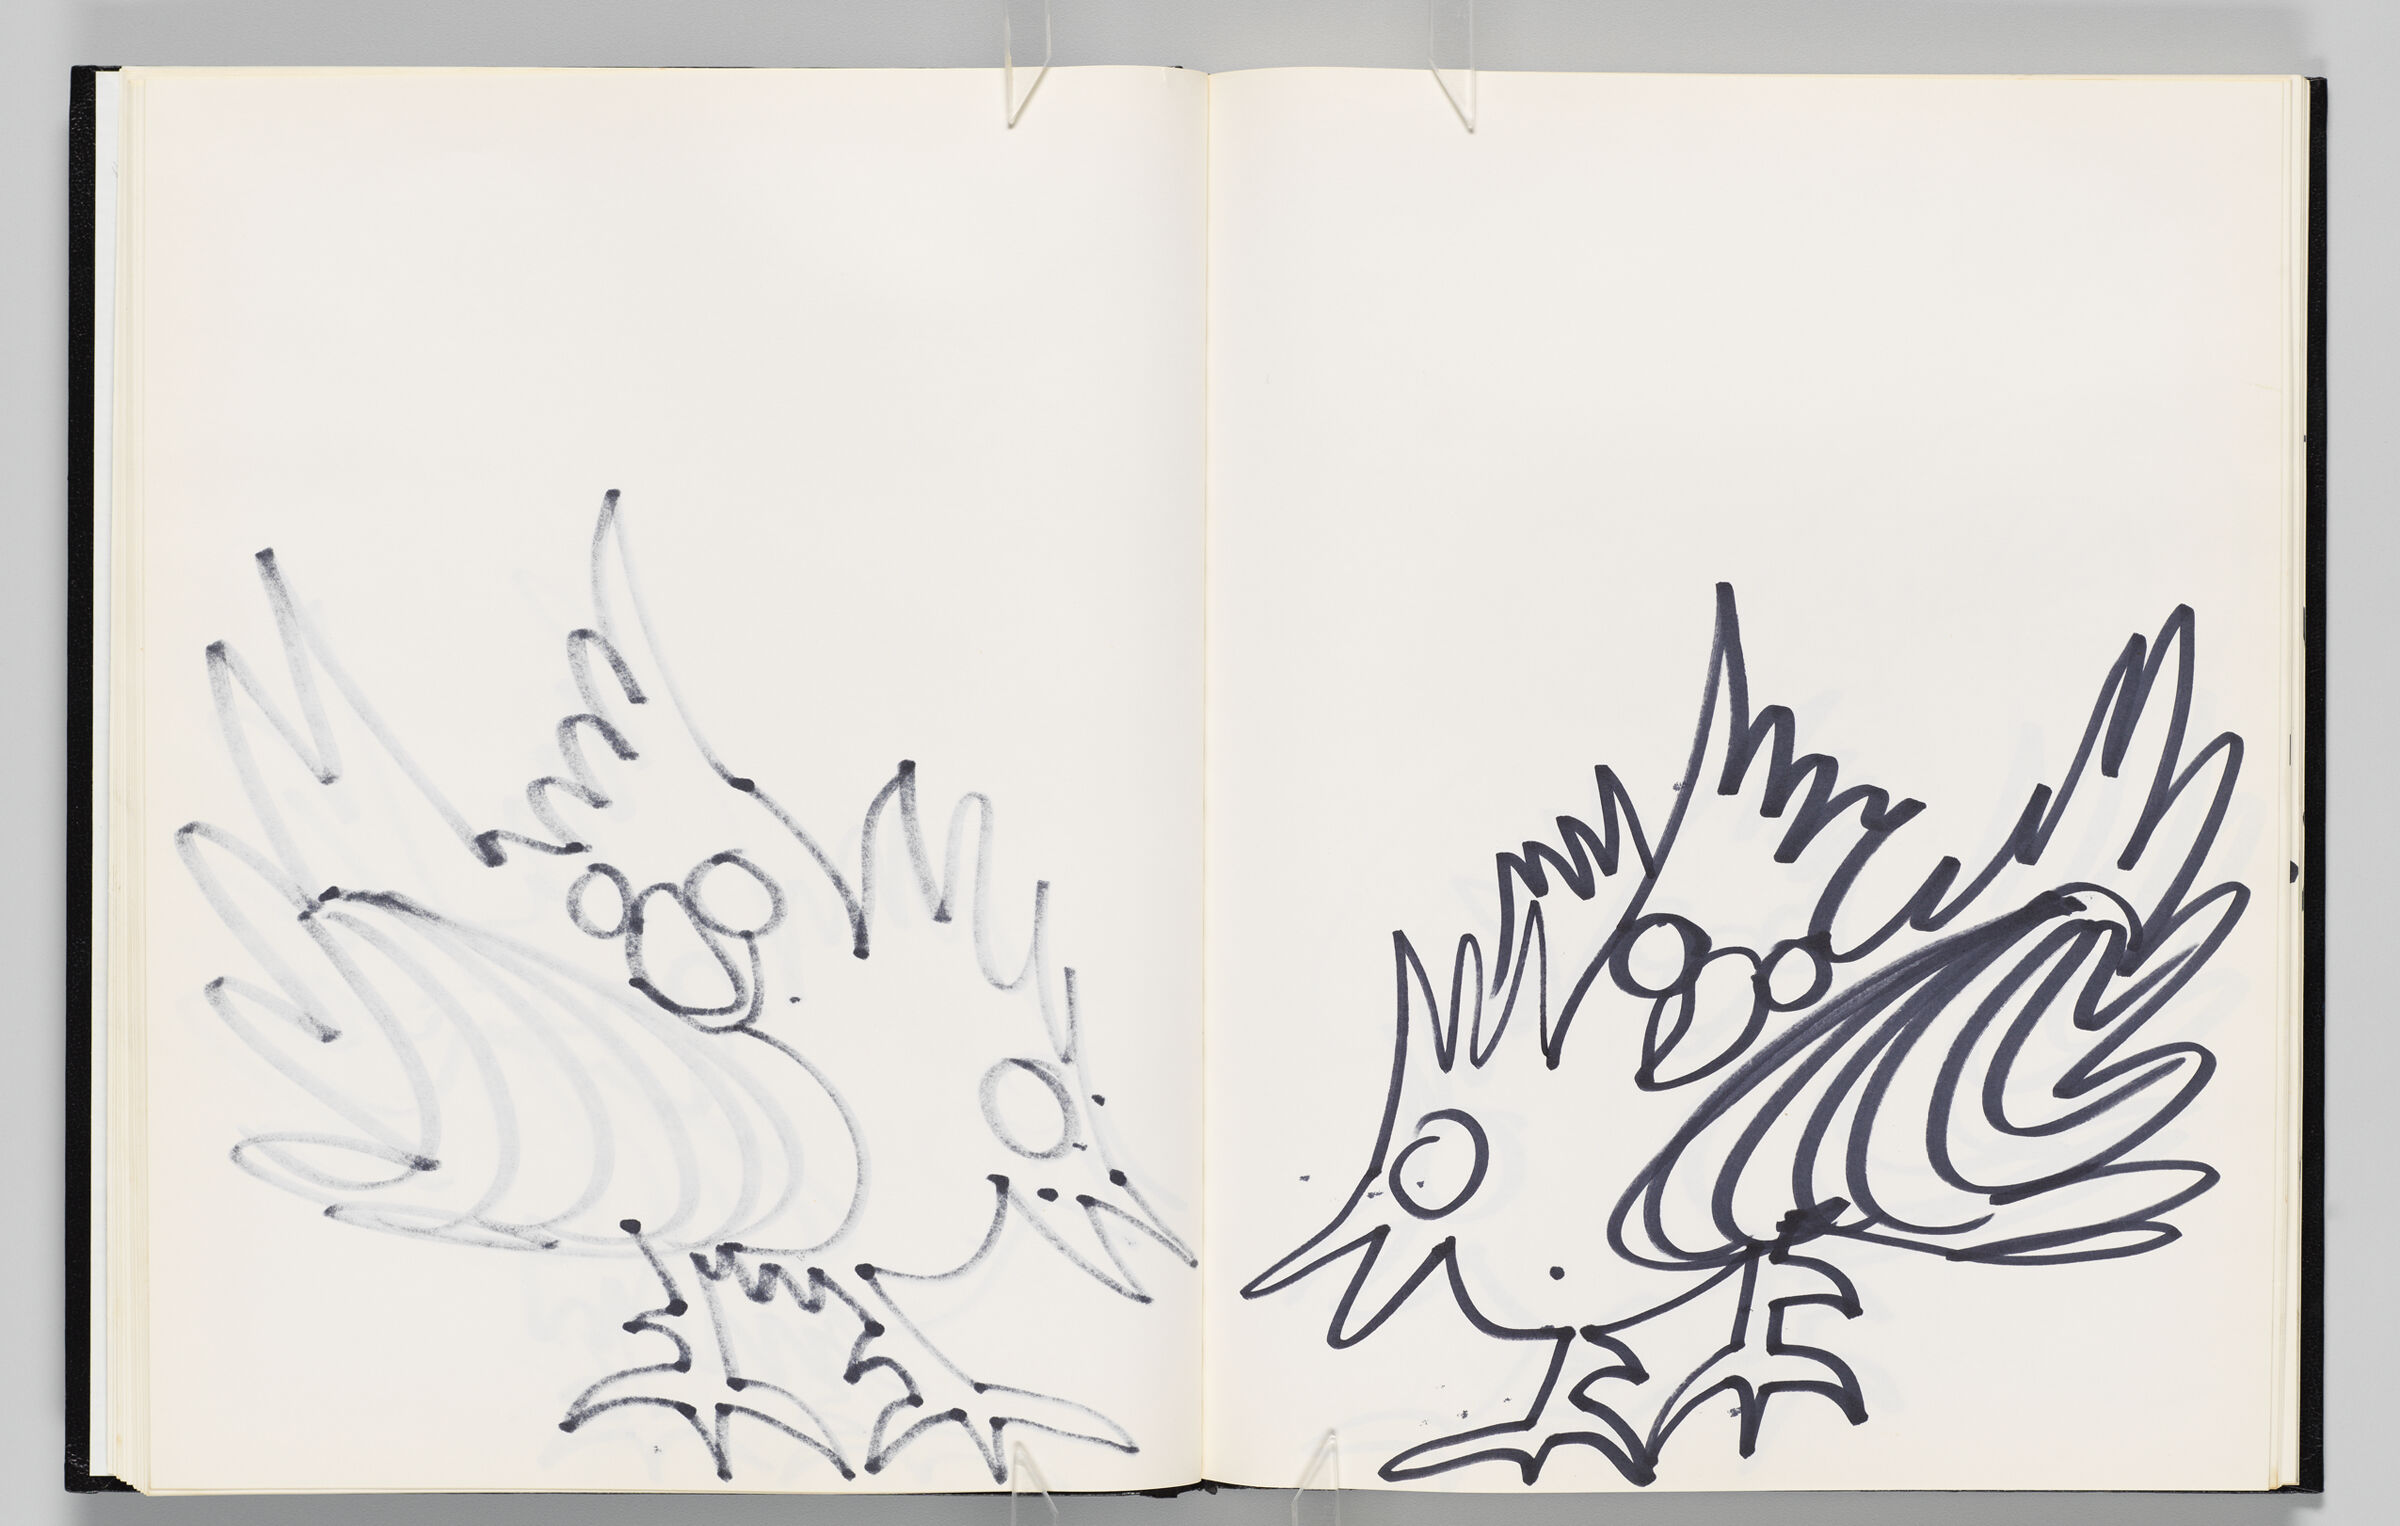 Untitled (Bleed-Through Of Previous Page, Left Page); Untitled (Birds, Right Page)